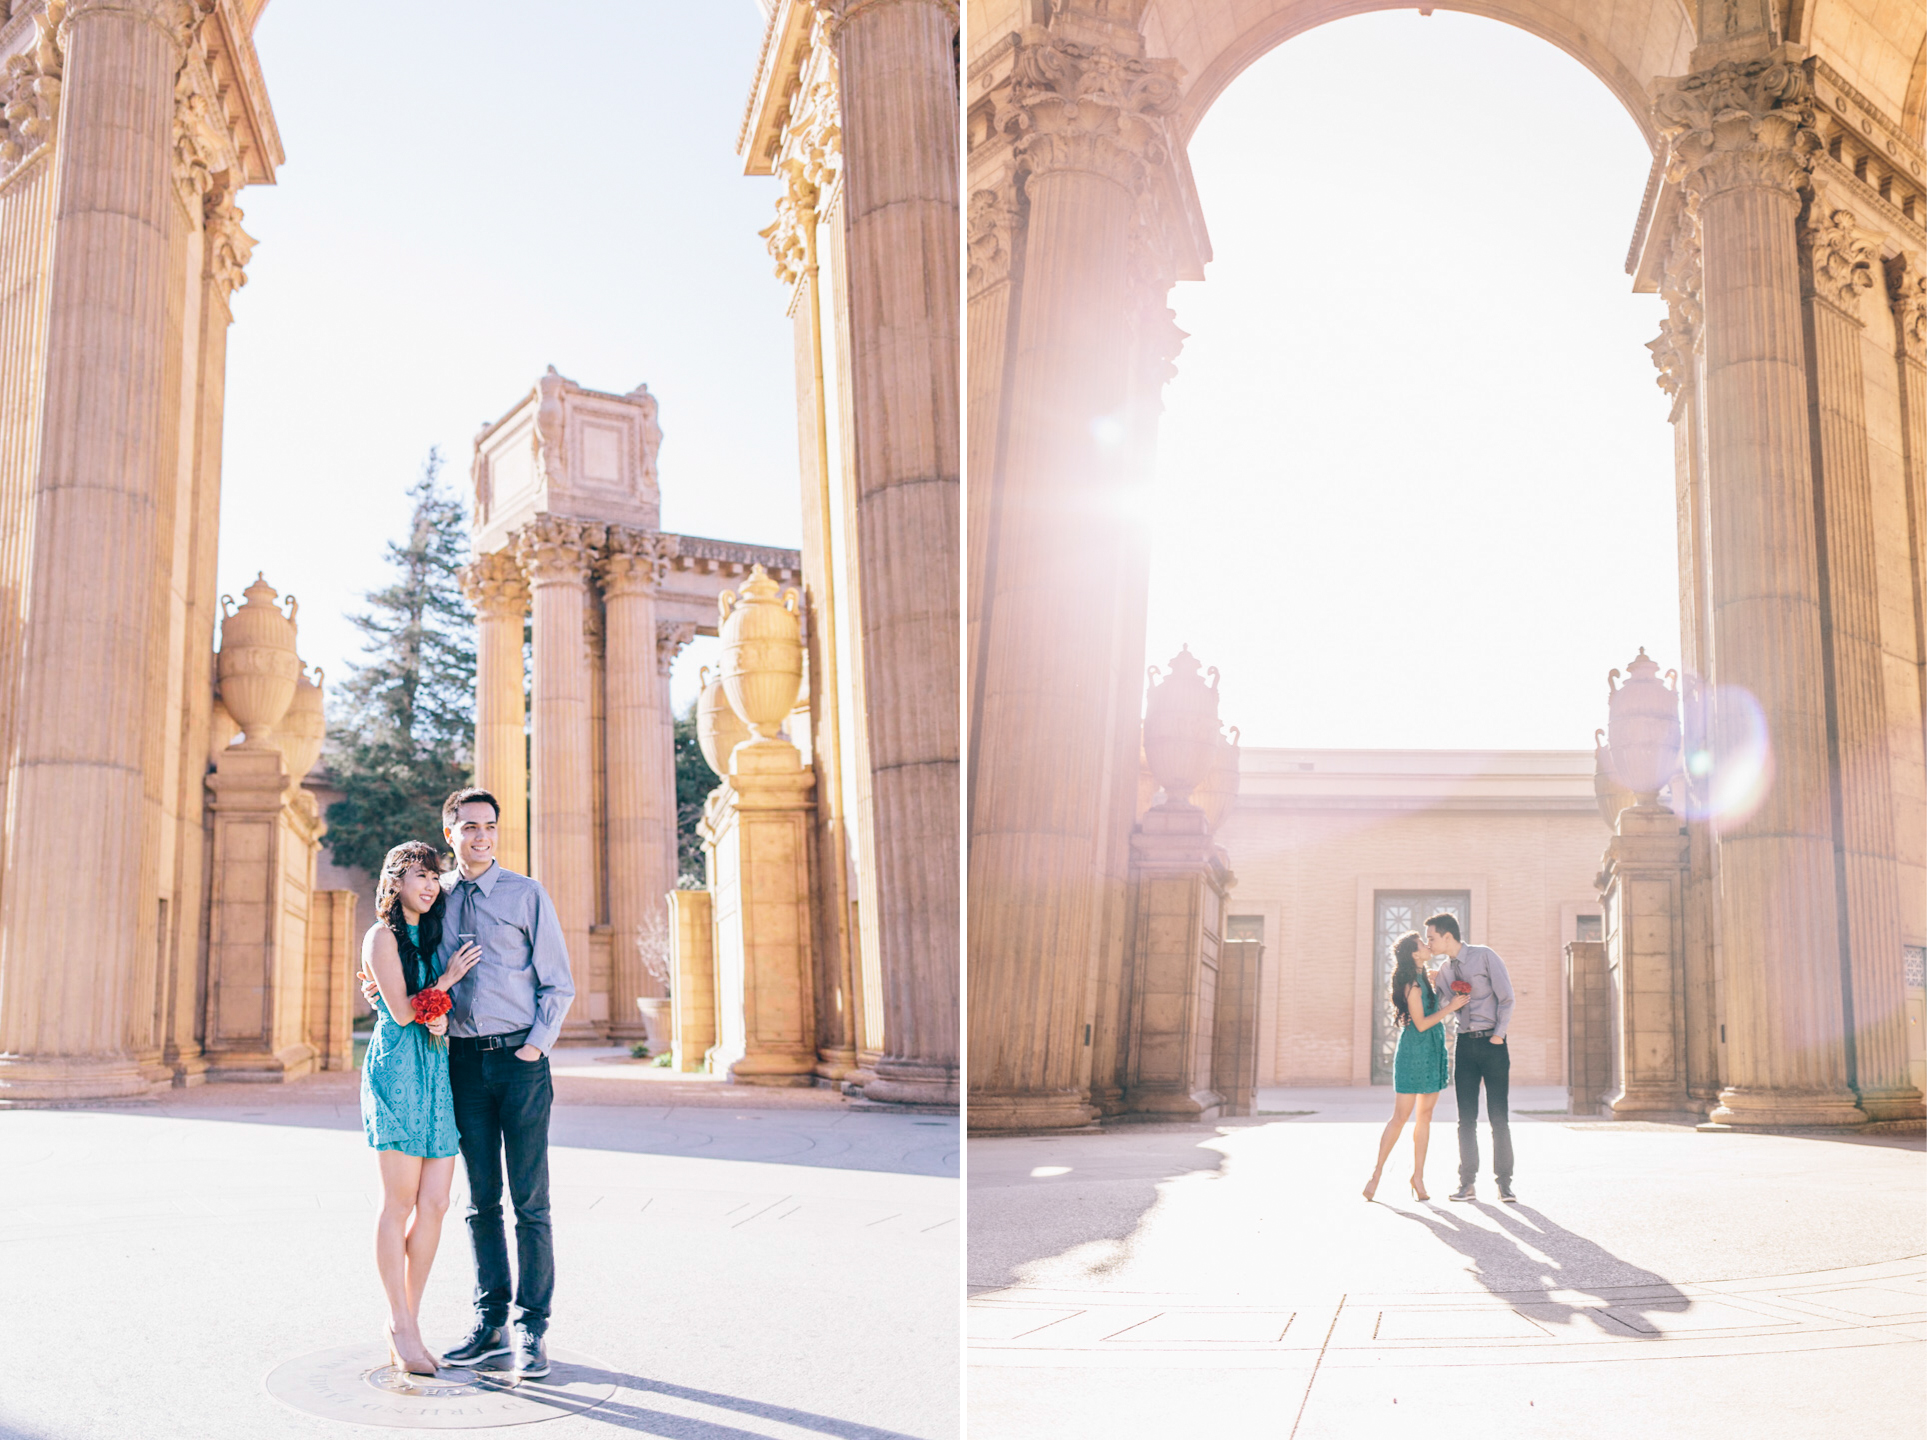 San Francisco Engagement Session Crissy Fields Palace of Fine Arts Engagement Photos by Engagement and Wedding Photographer JBJ Pictures-302.jpg